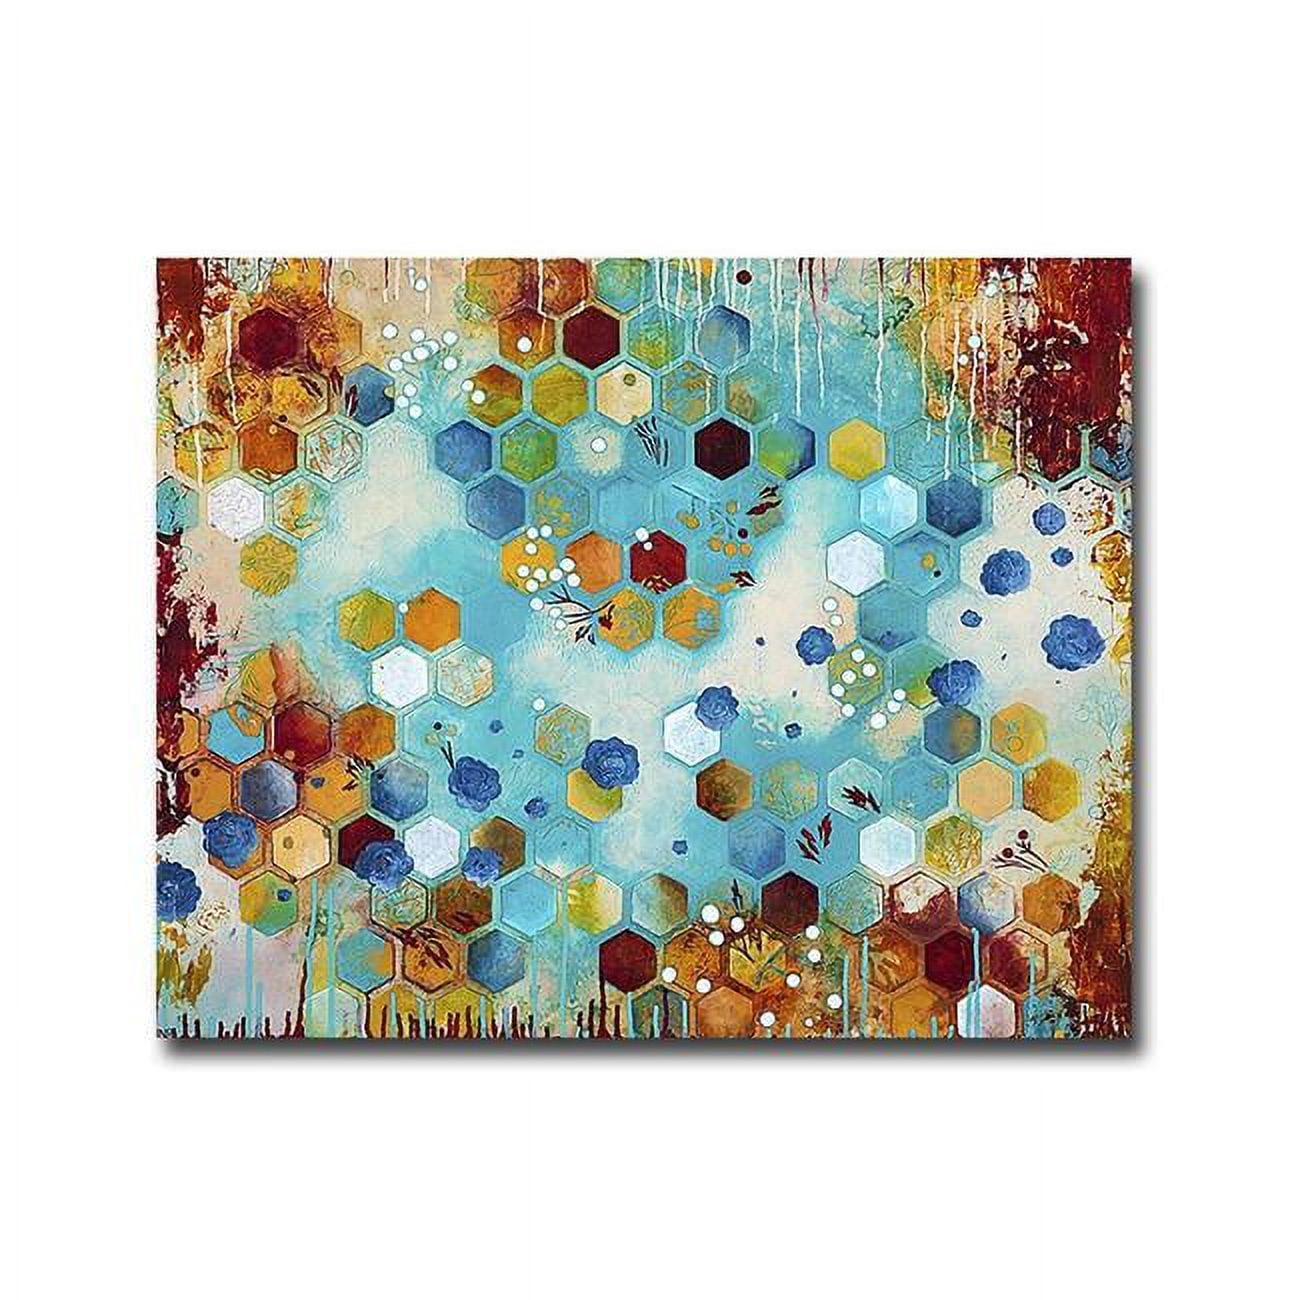 1215n954ig Scattered By Heather Noel Robinson Premium Gallery-wrapped Canvas Giclee Art - 12 X 15 X 1.5 In.